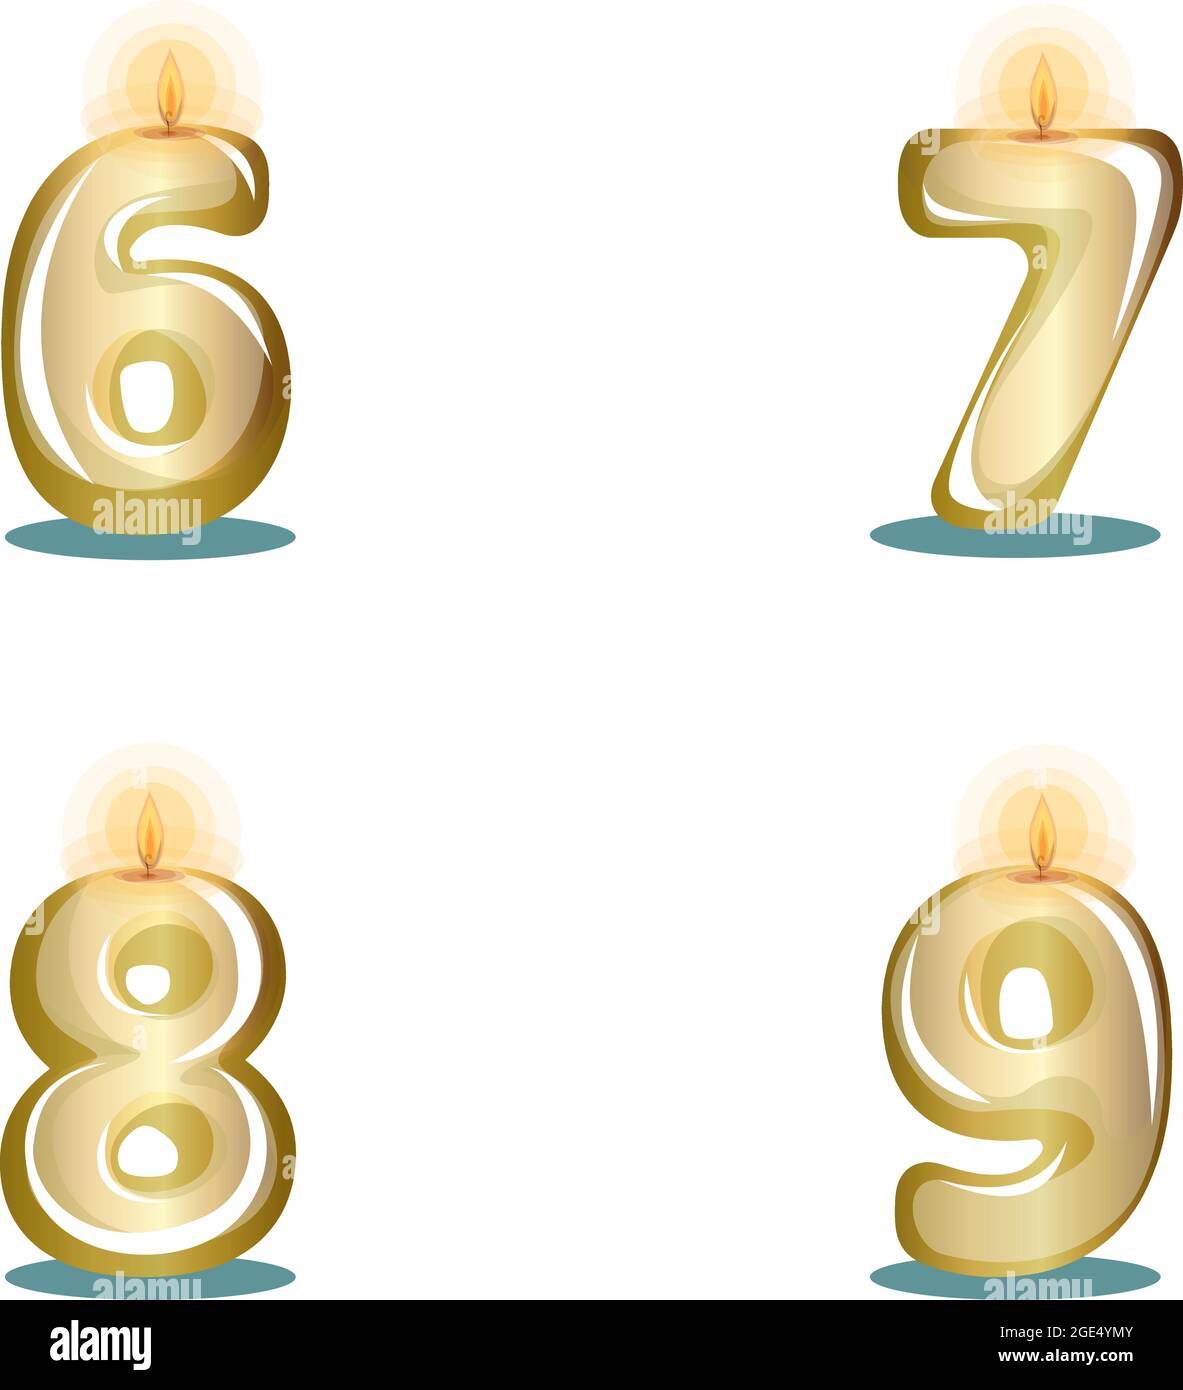 Vector image of candles metallized in gold in the form of numbers on a white background in cartoon style Stock Vector